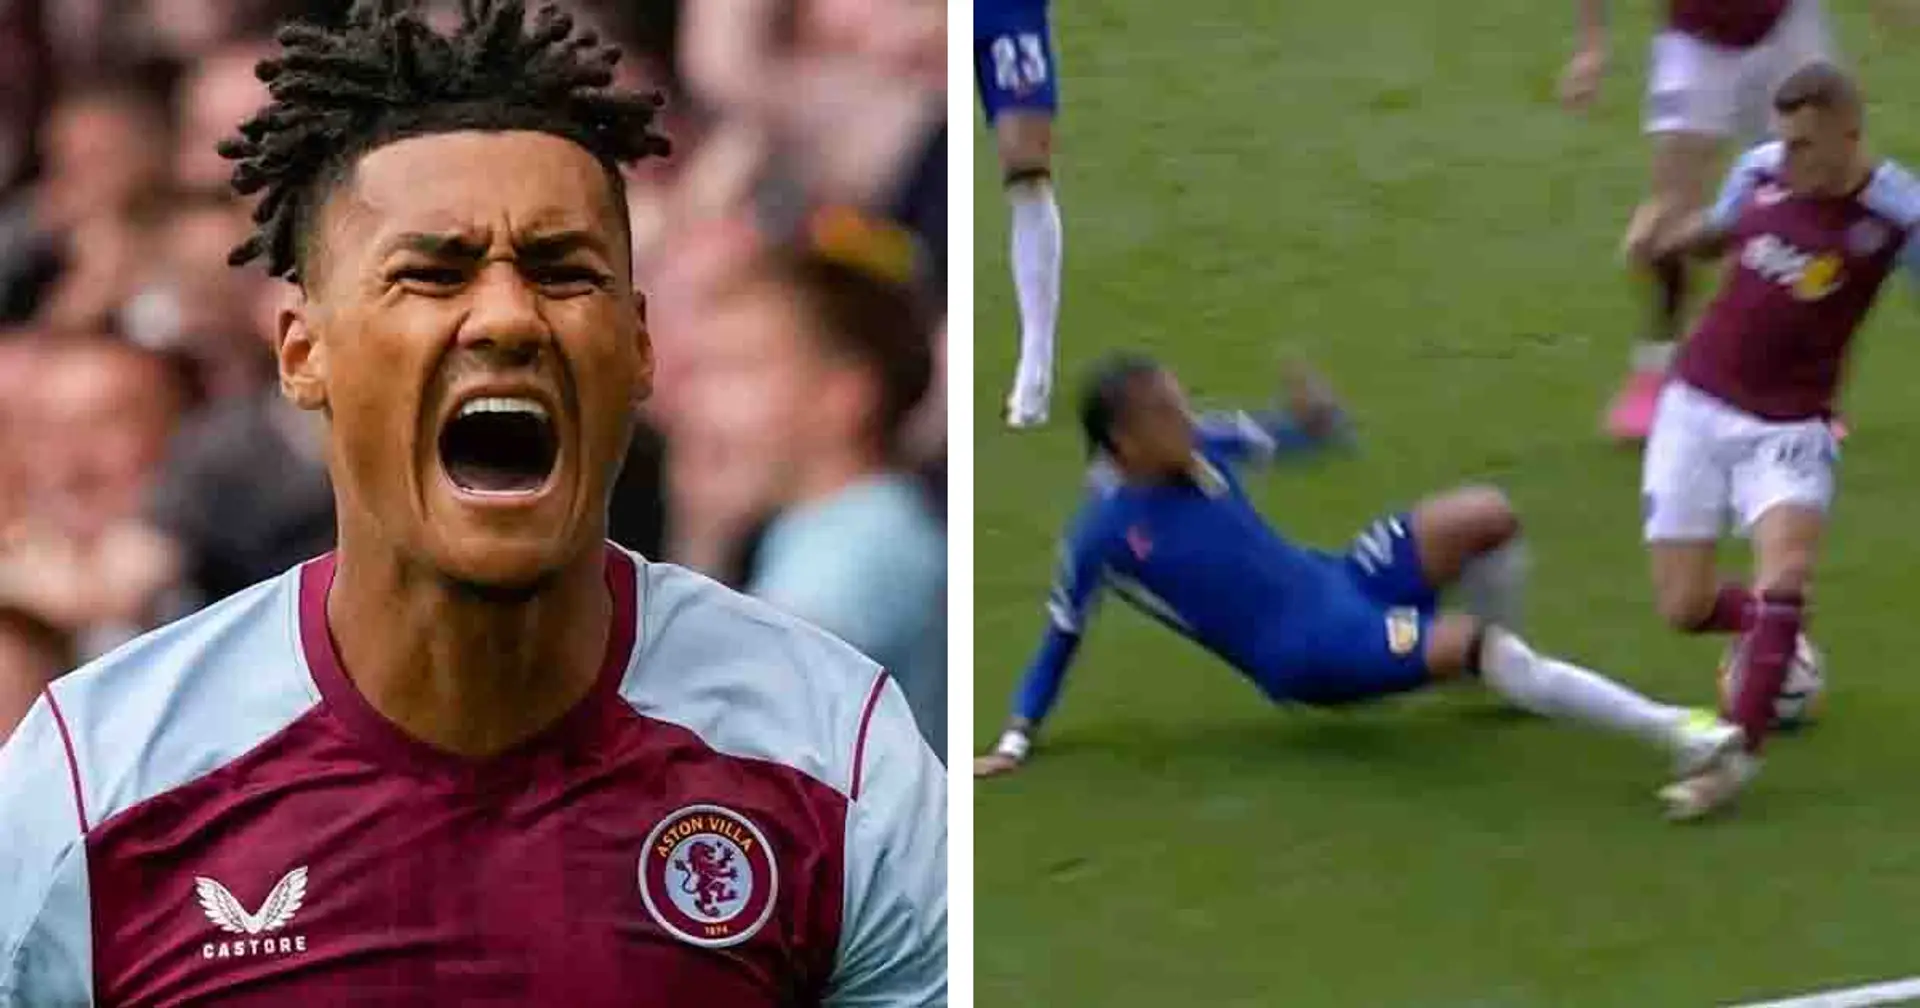 'That gives us the advantage': Ollie Watkins reveals thoughts around Gusto's controversial red card